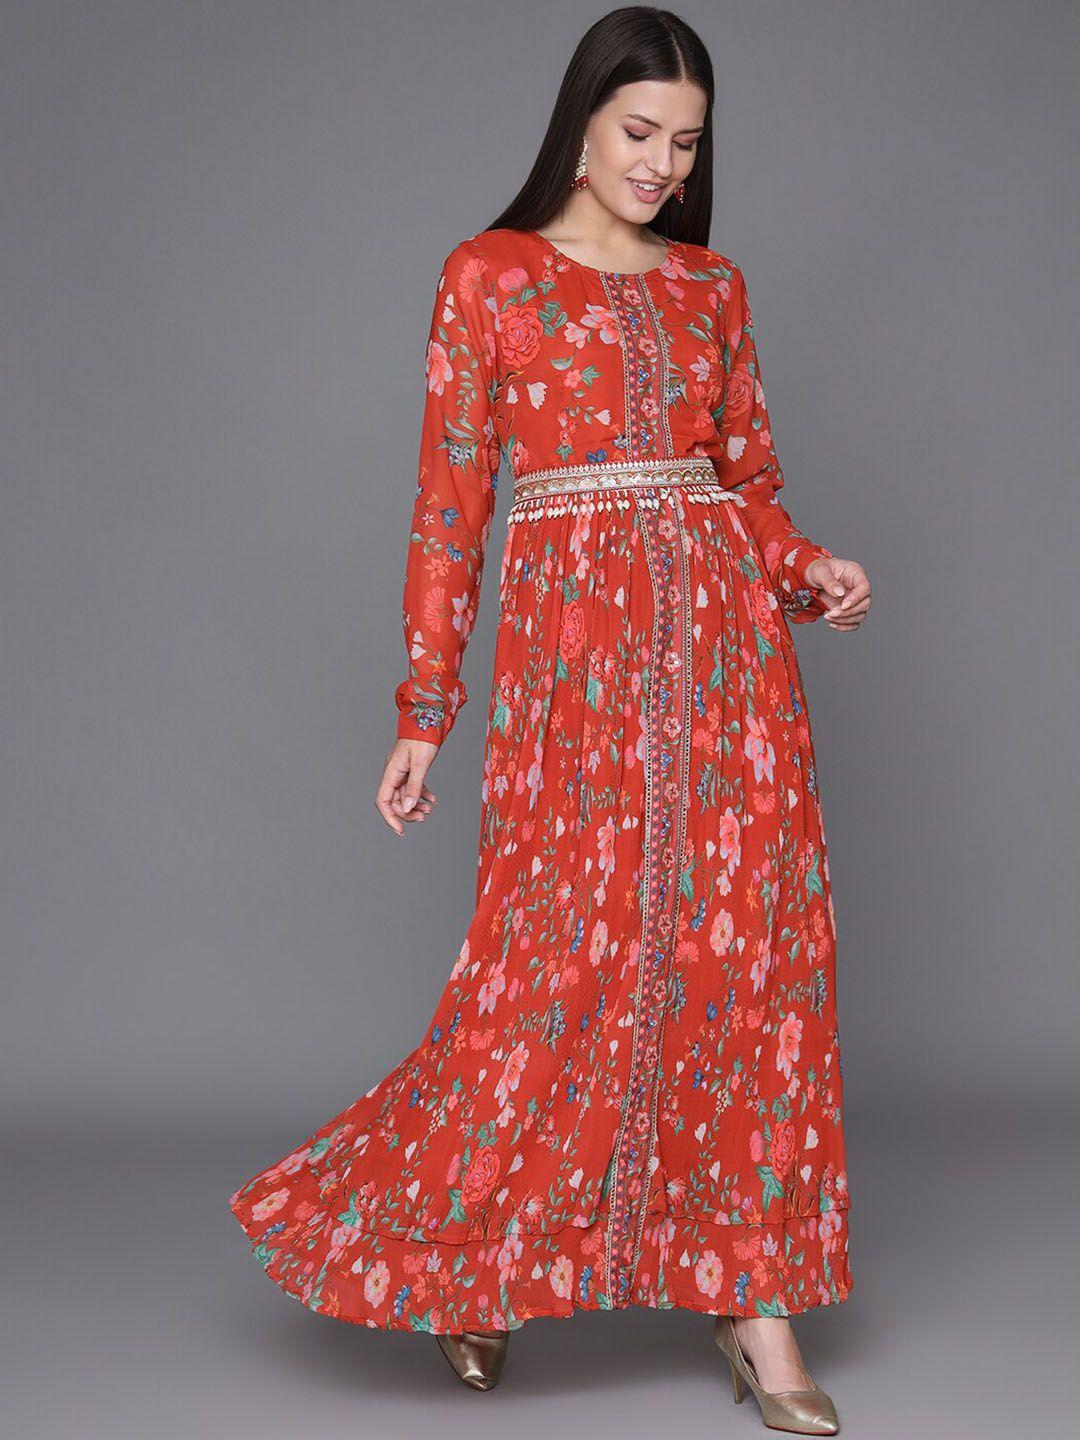 heeposh floral printed georgette fit & flare ethnic dress with organza dupatta and belt